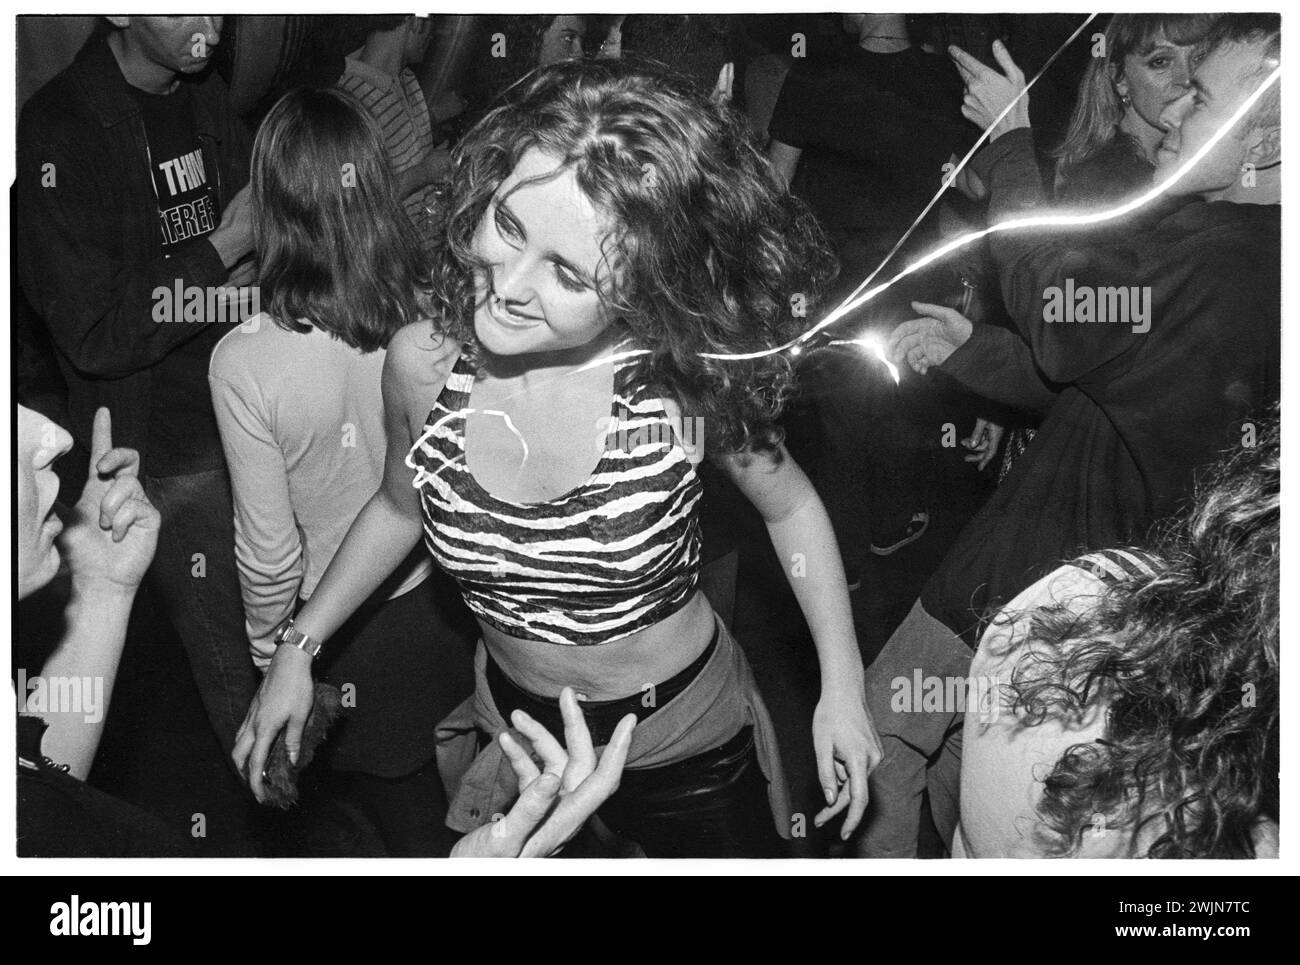 A woman in an animal print top lost in music dancing in Clwb Ifor Bach in Cardiff Wales in January 1996. Photo: Rob Watkins. Stock Photo